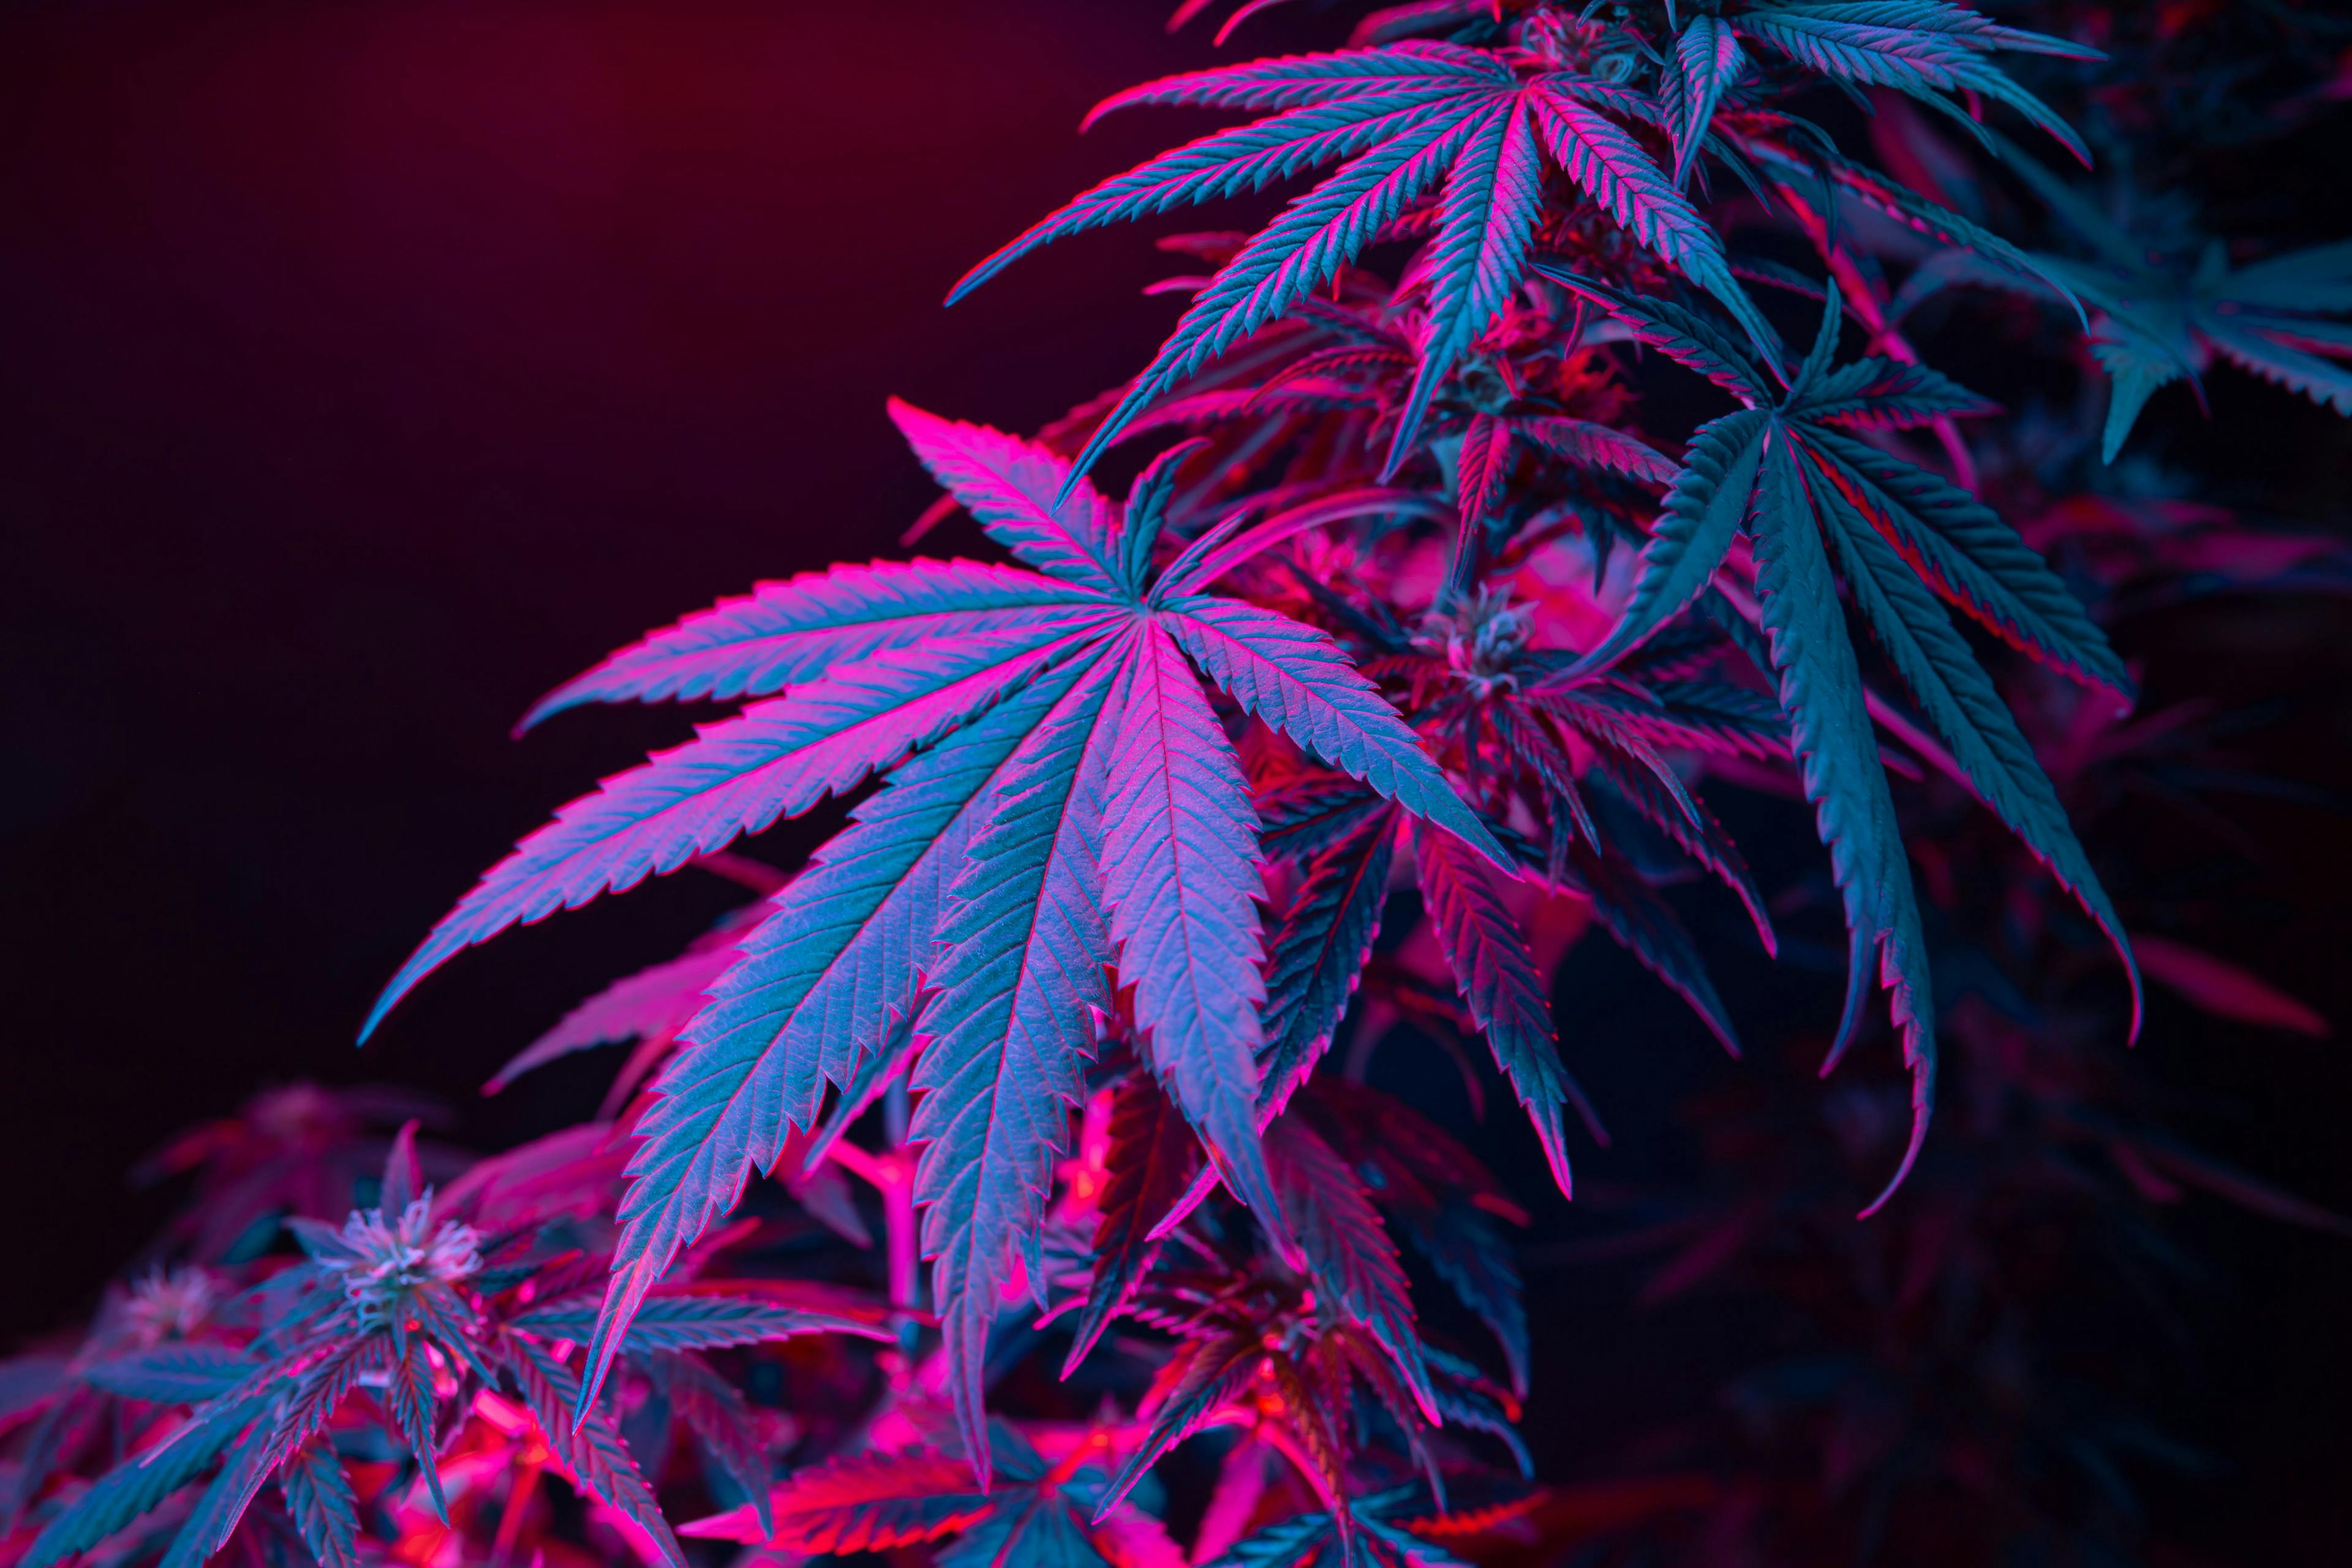 Cannabis leaves. Cannabis marijuana foliage with a purple pink tint on a black background. Large leaf of cannabis plant in purple light. Medicinal hemp: a new look at the agricultural hemp strain | Image Credit: Tsareva.pro - stock.adobe.com